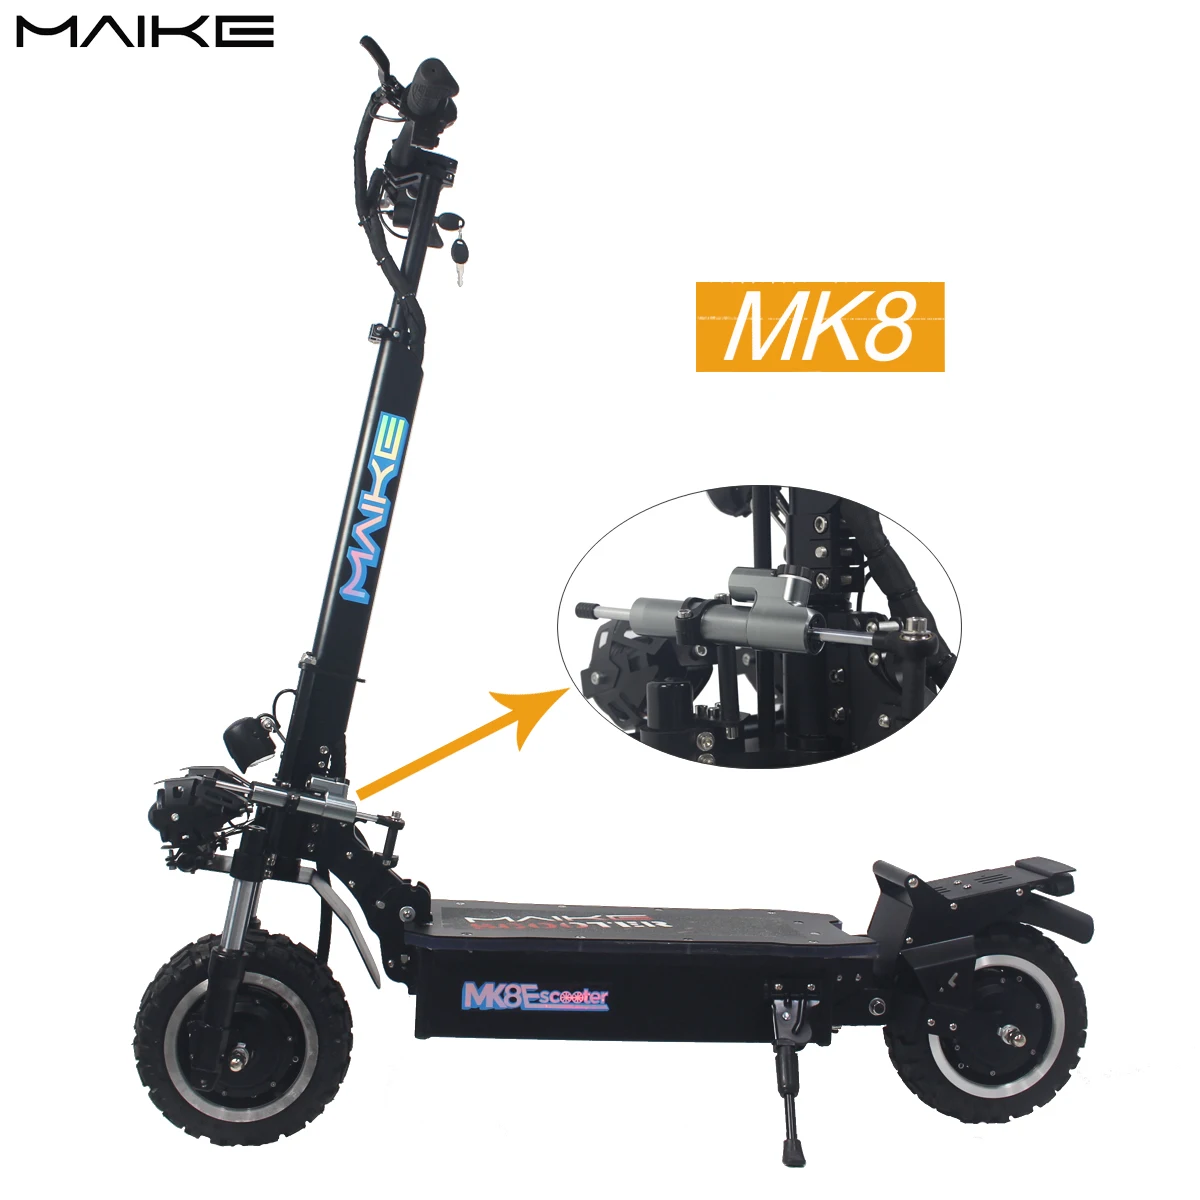 

Amazon Hot Selling MAIKE mk8 5000w dual motor e scooter 11 inch big wheel fast speed dropship electric scooters adult